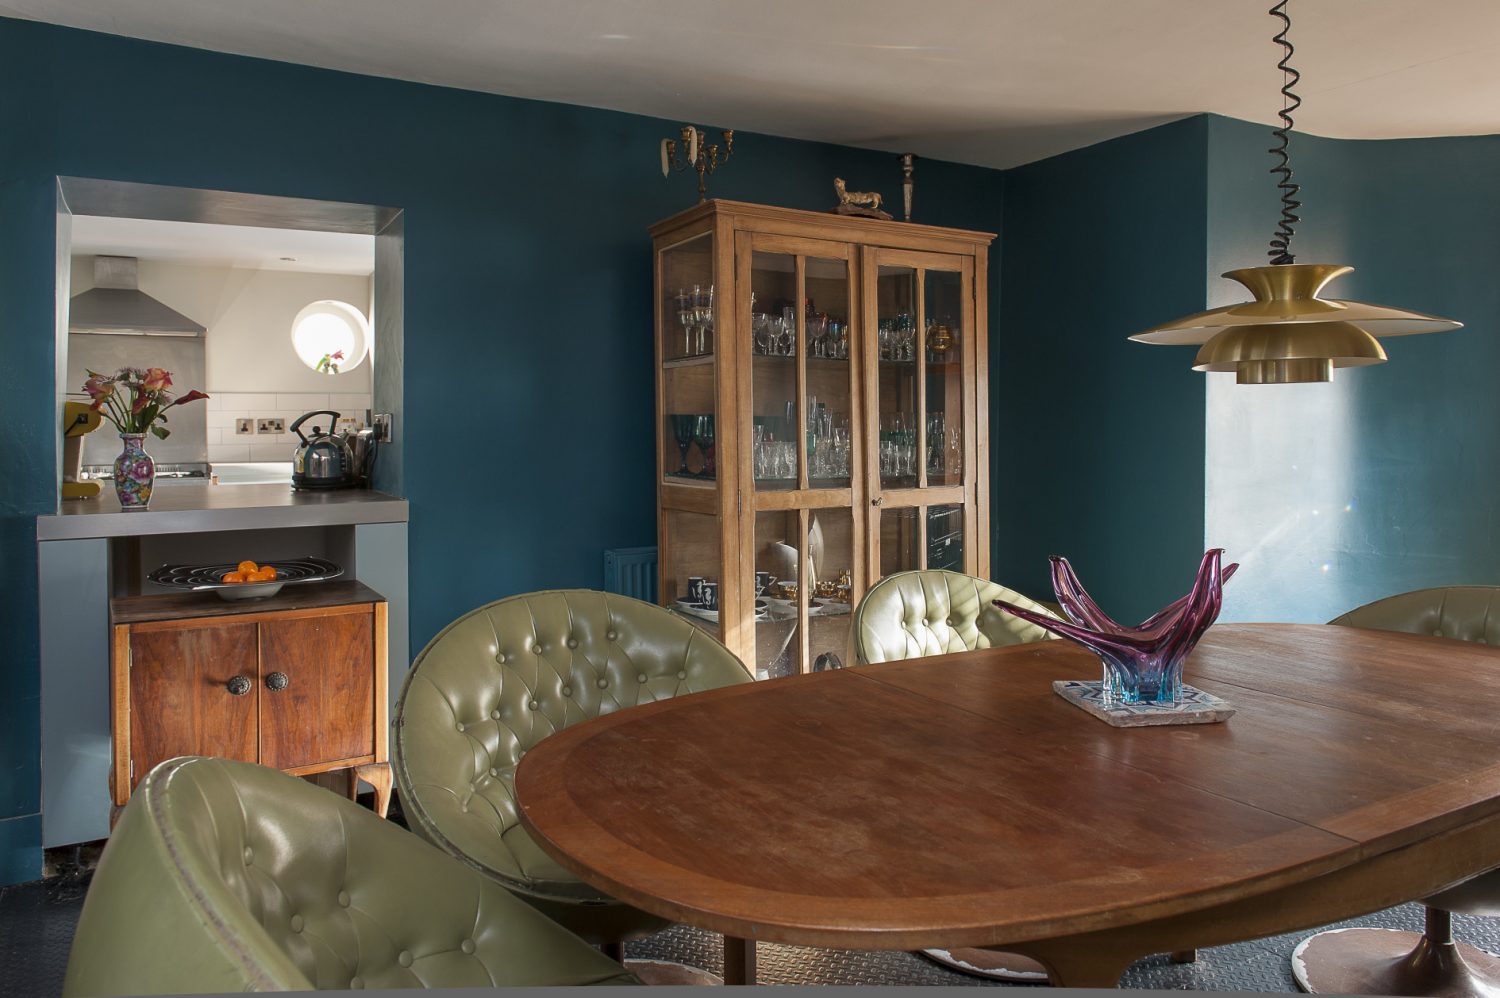 Nadene found the oval 60s teak dining table in a local charity shop and the couple have surrounded it with deep, green leather nightclub swivel chairs from eBay. A French glass-fronted and sided linen cabinet displays Nadene’s eclectic collection of glassware